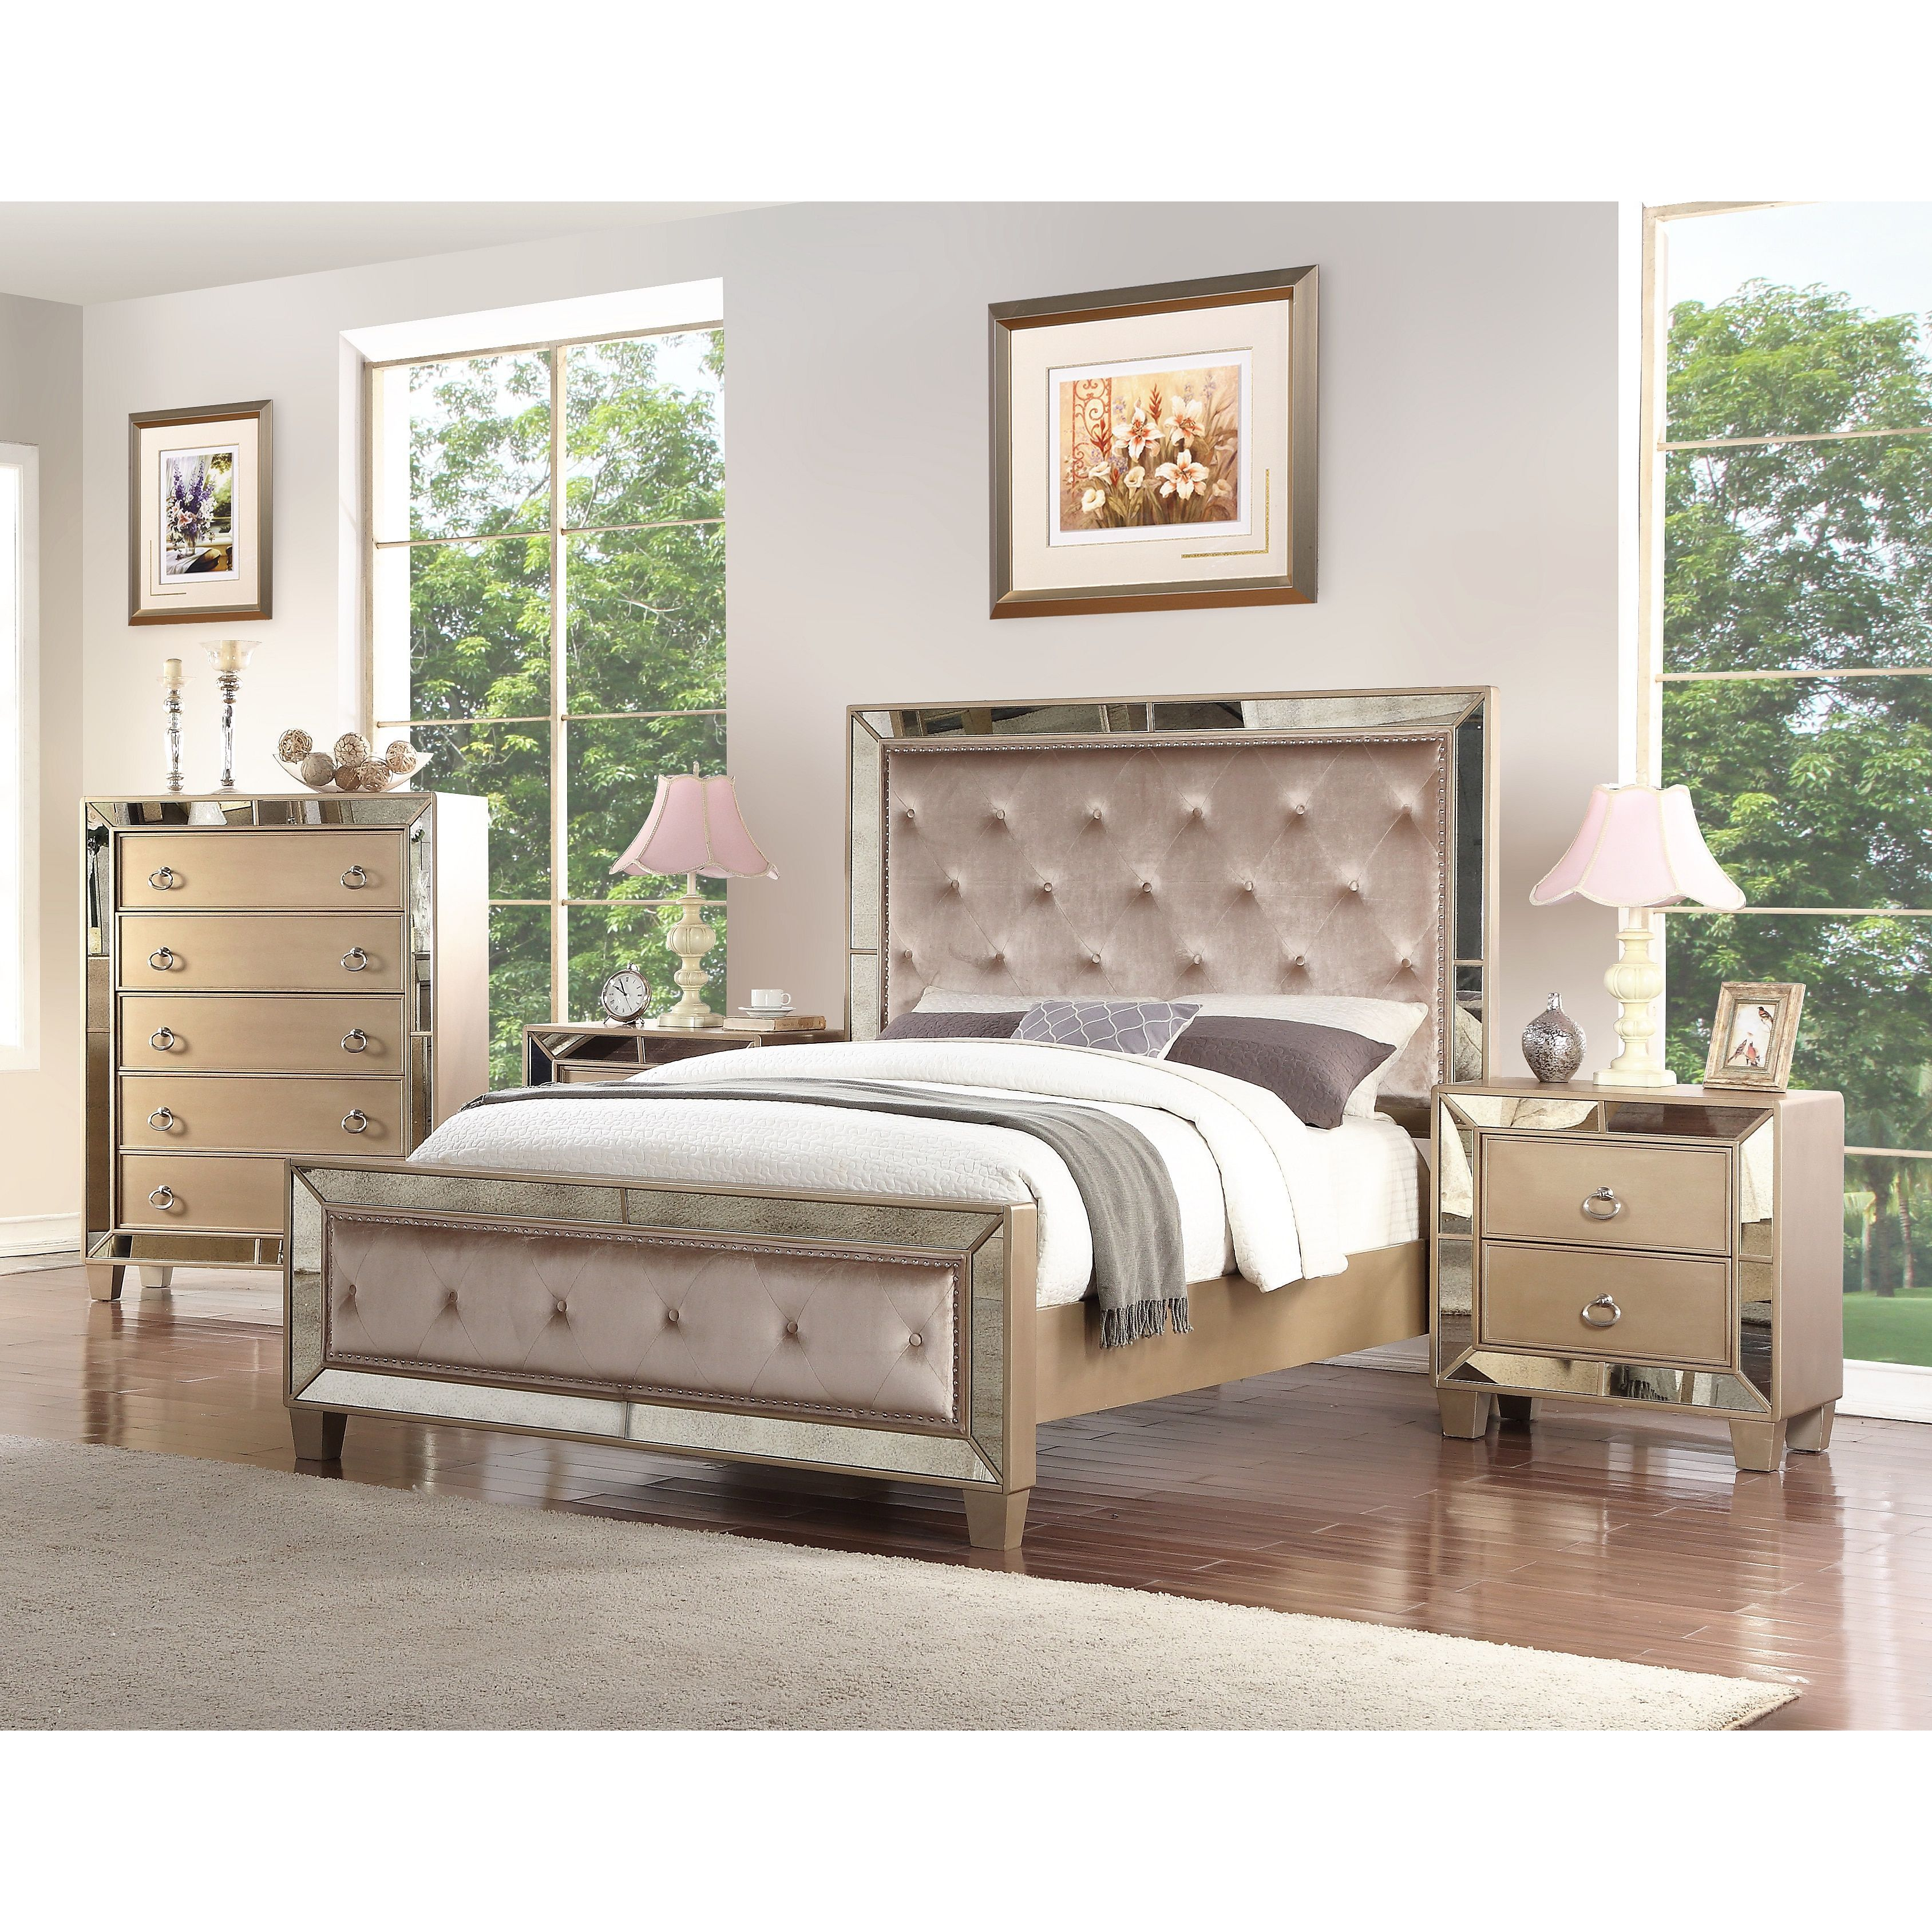 Abson Chateau Mirrored Tufted 4 Piece Bedroom Set California King inside measurements 3376 X 3376